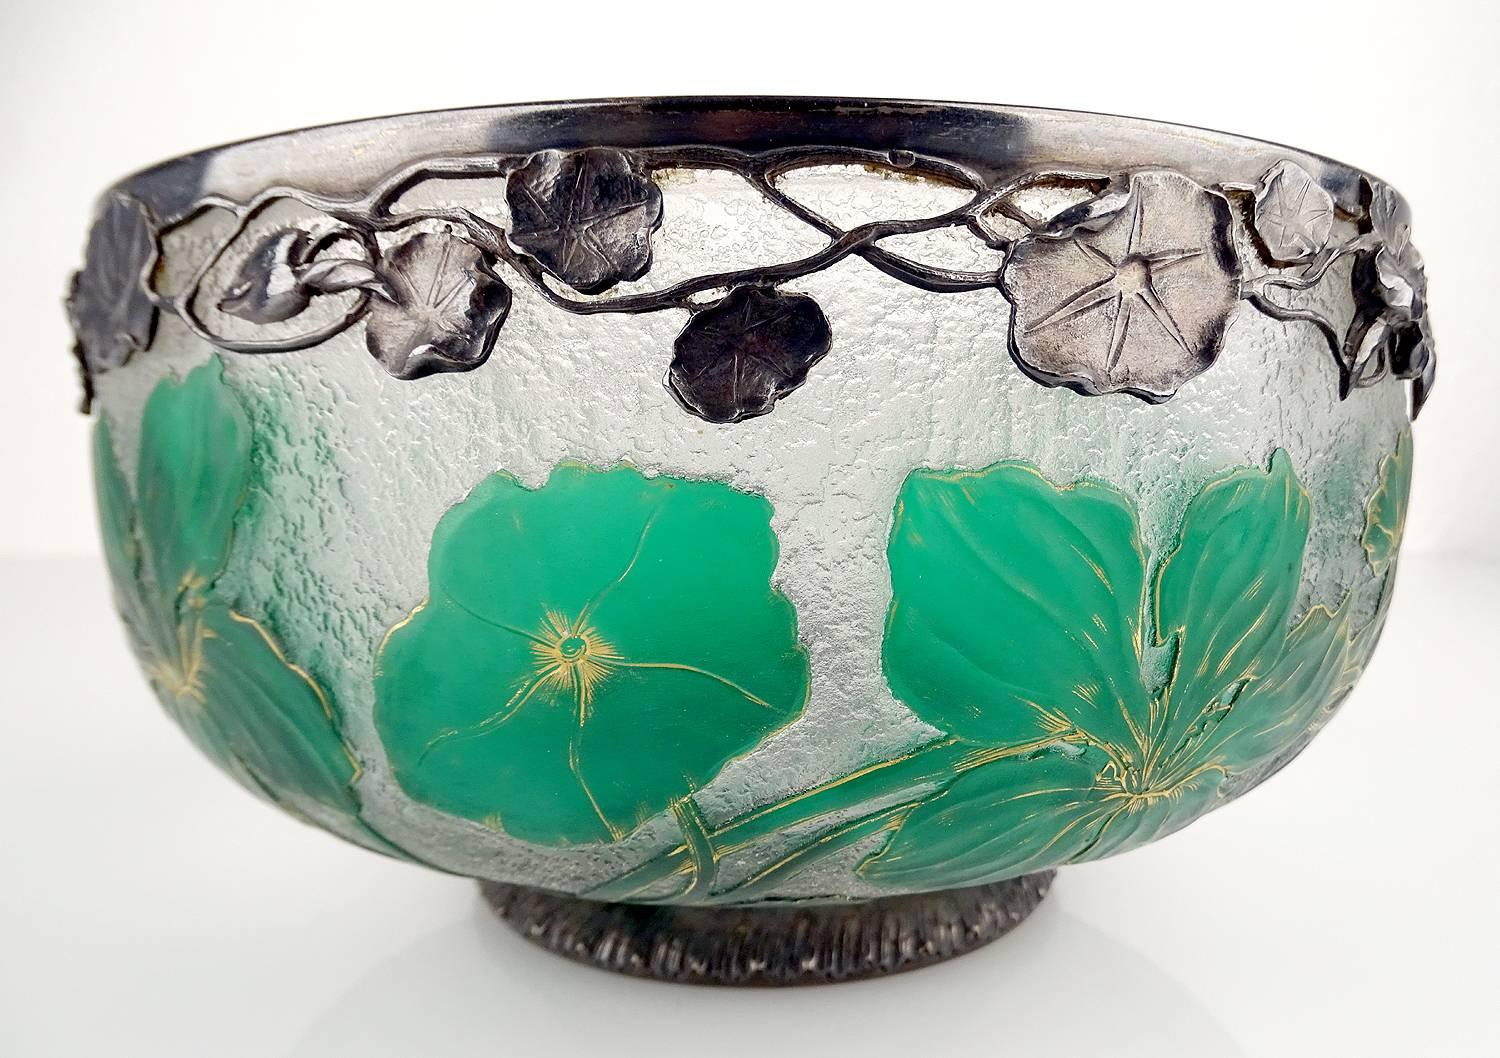 Exceptional French  Art Deco Daum bowl with squash blossom and sterling silver overlay,
overlay glass (green and clear), acid stenciled and wheel cut flowers, accentuated with gold,
wrought silver friese with identical flower patterns, signed with